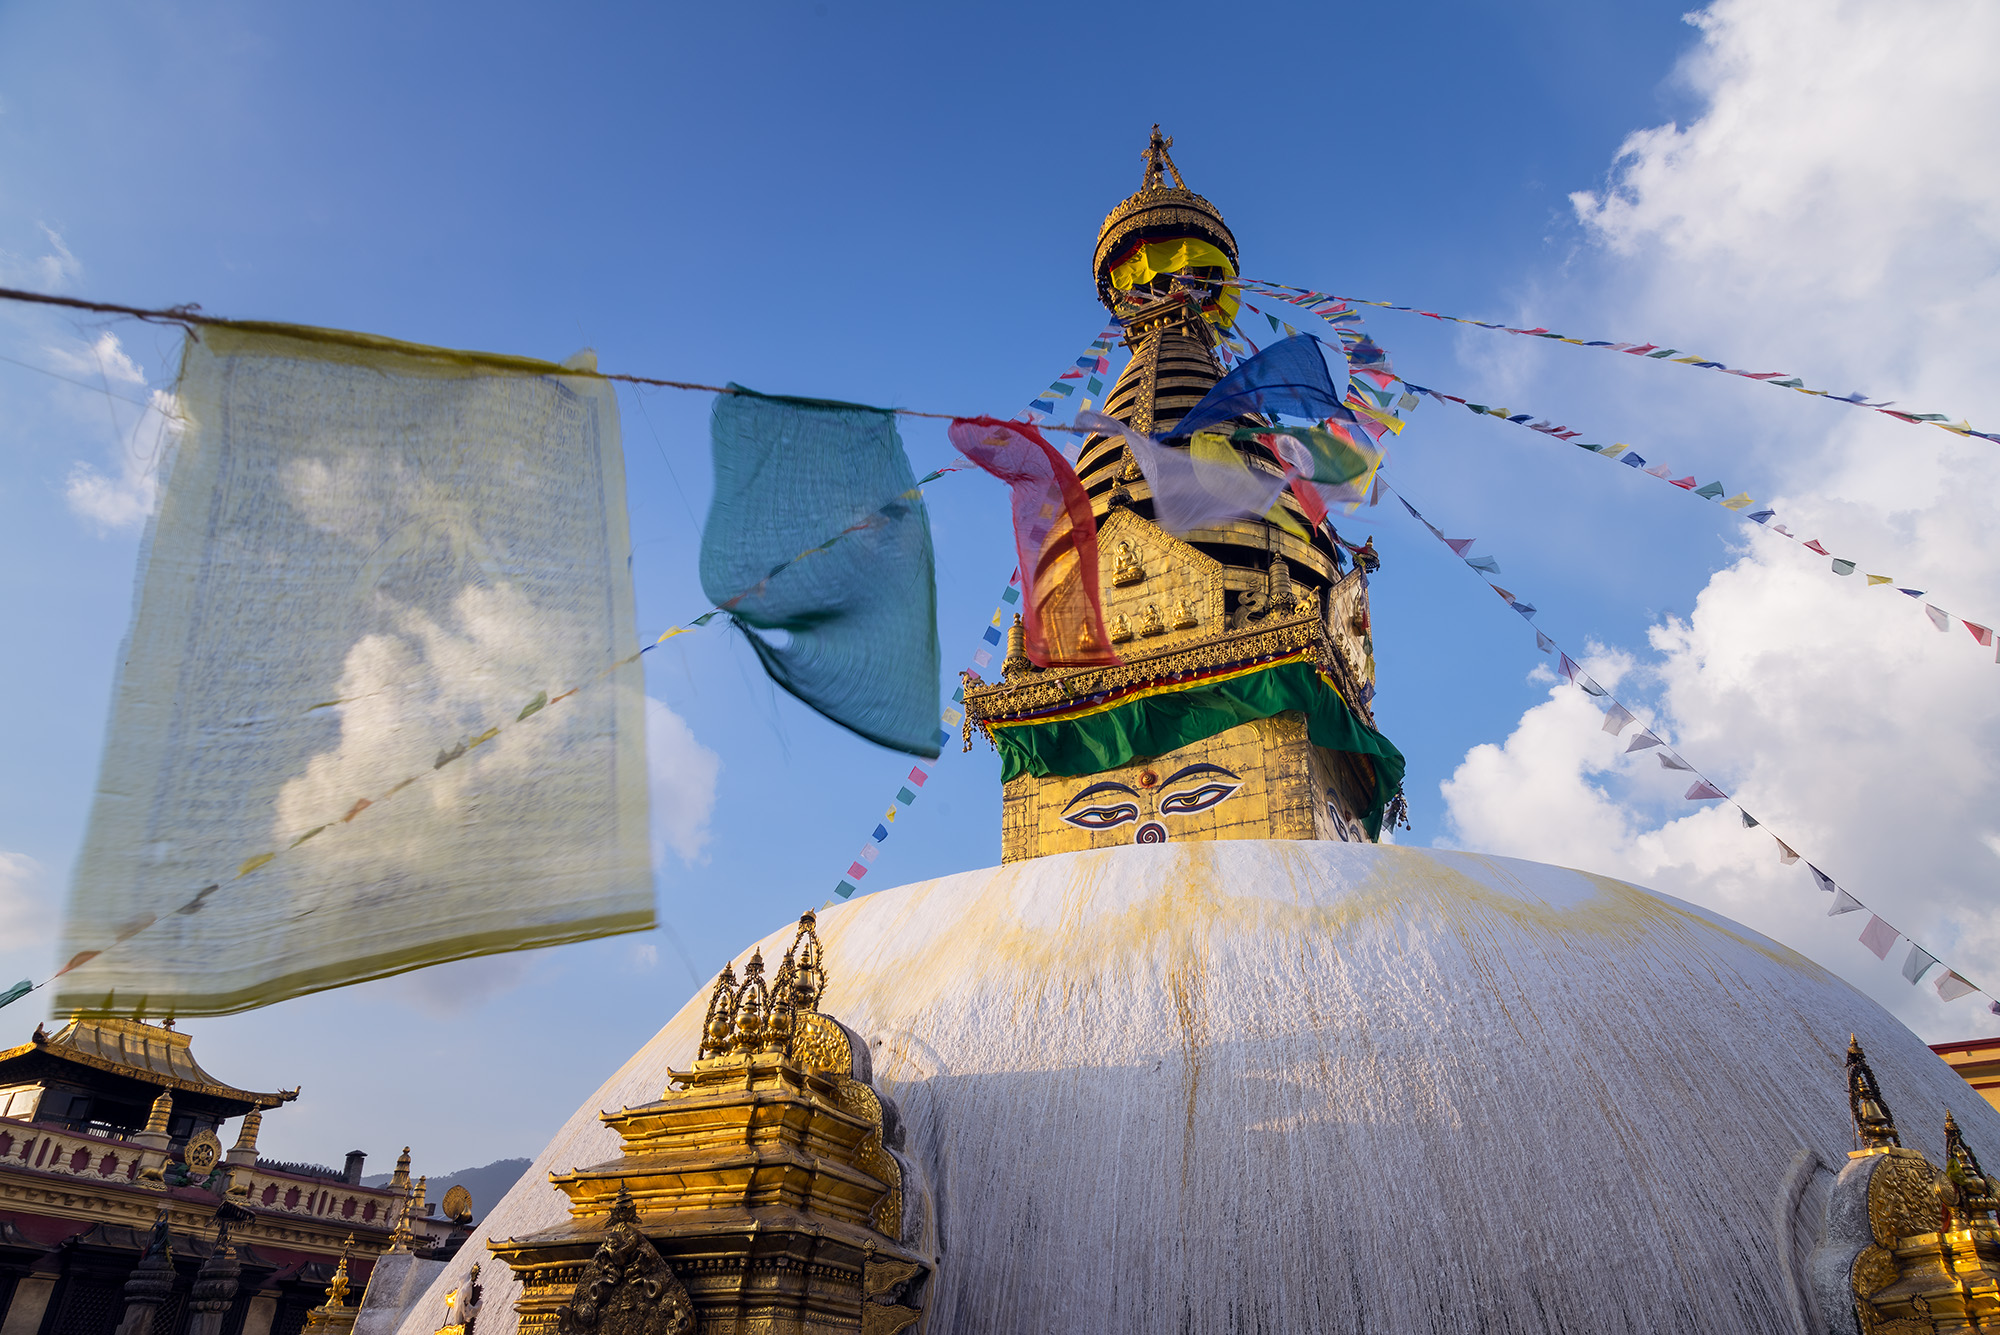 "Eyes of Devotion" offers a close-up view of Kathmandu's Monkey Temple during the early morning. A prayer flag takes center stage...